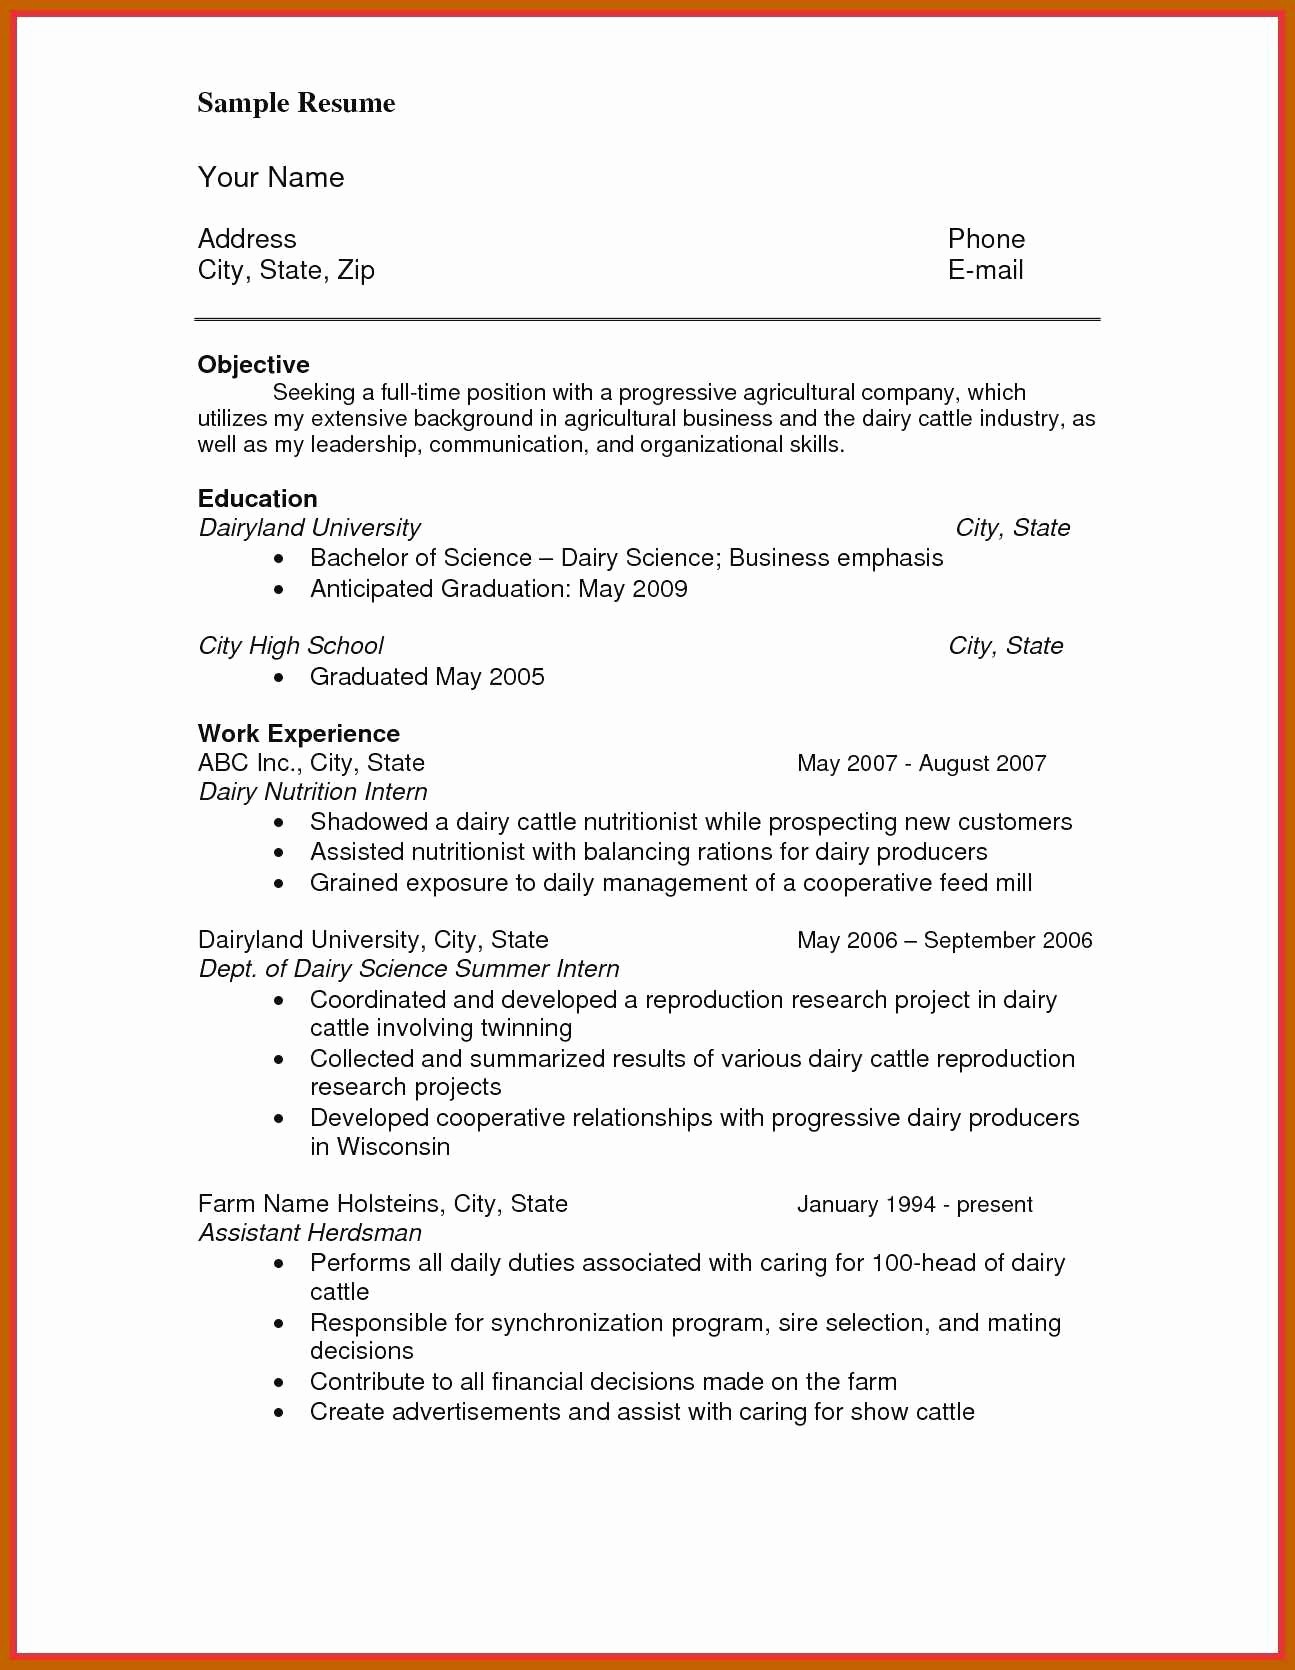 Listing References On A Resume Lovely 6 7 Reference List format